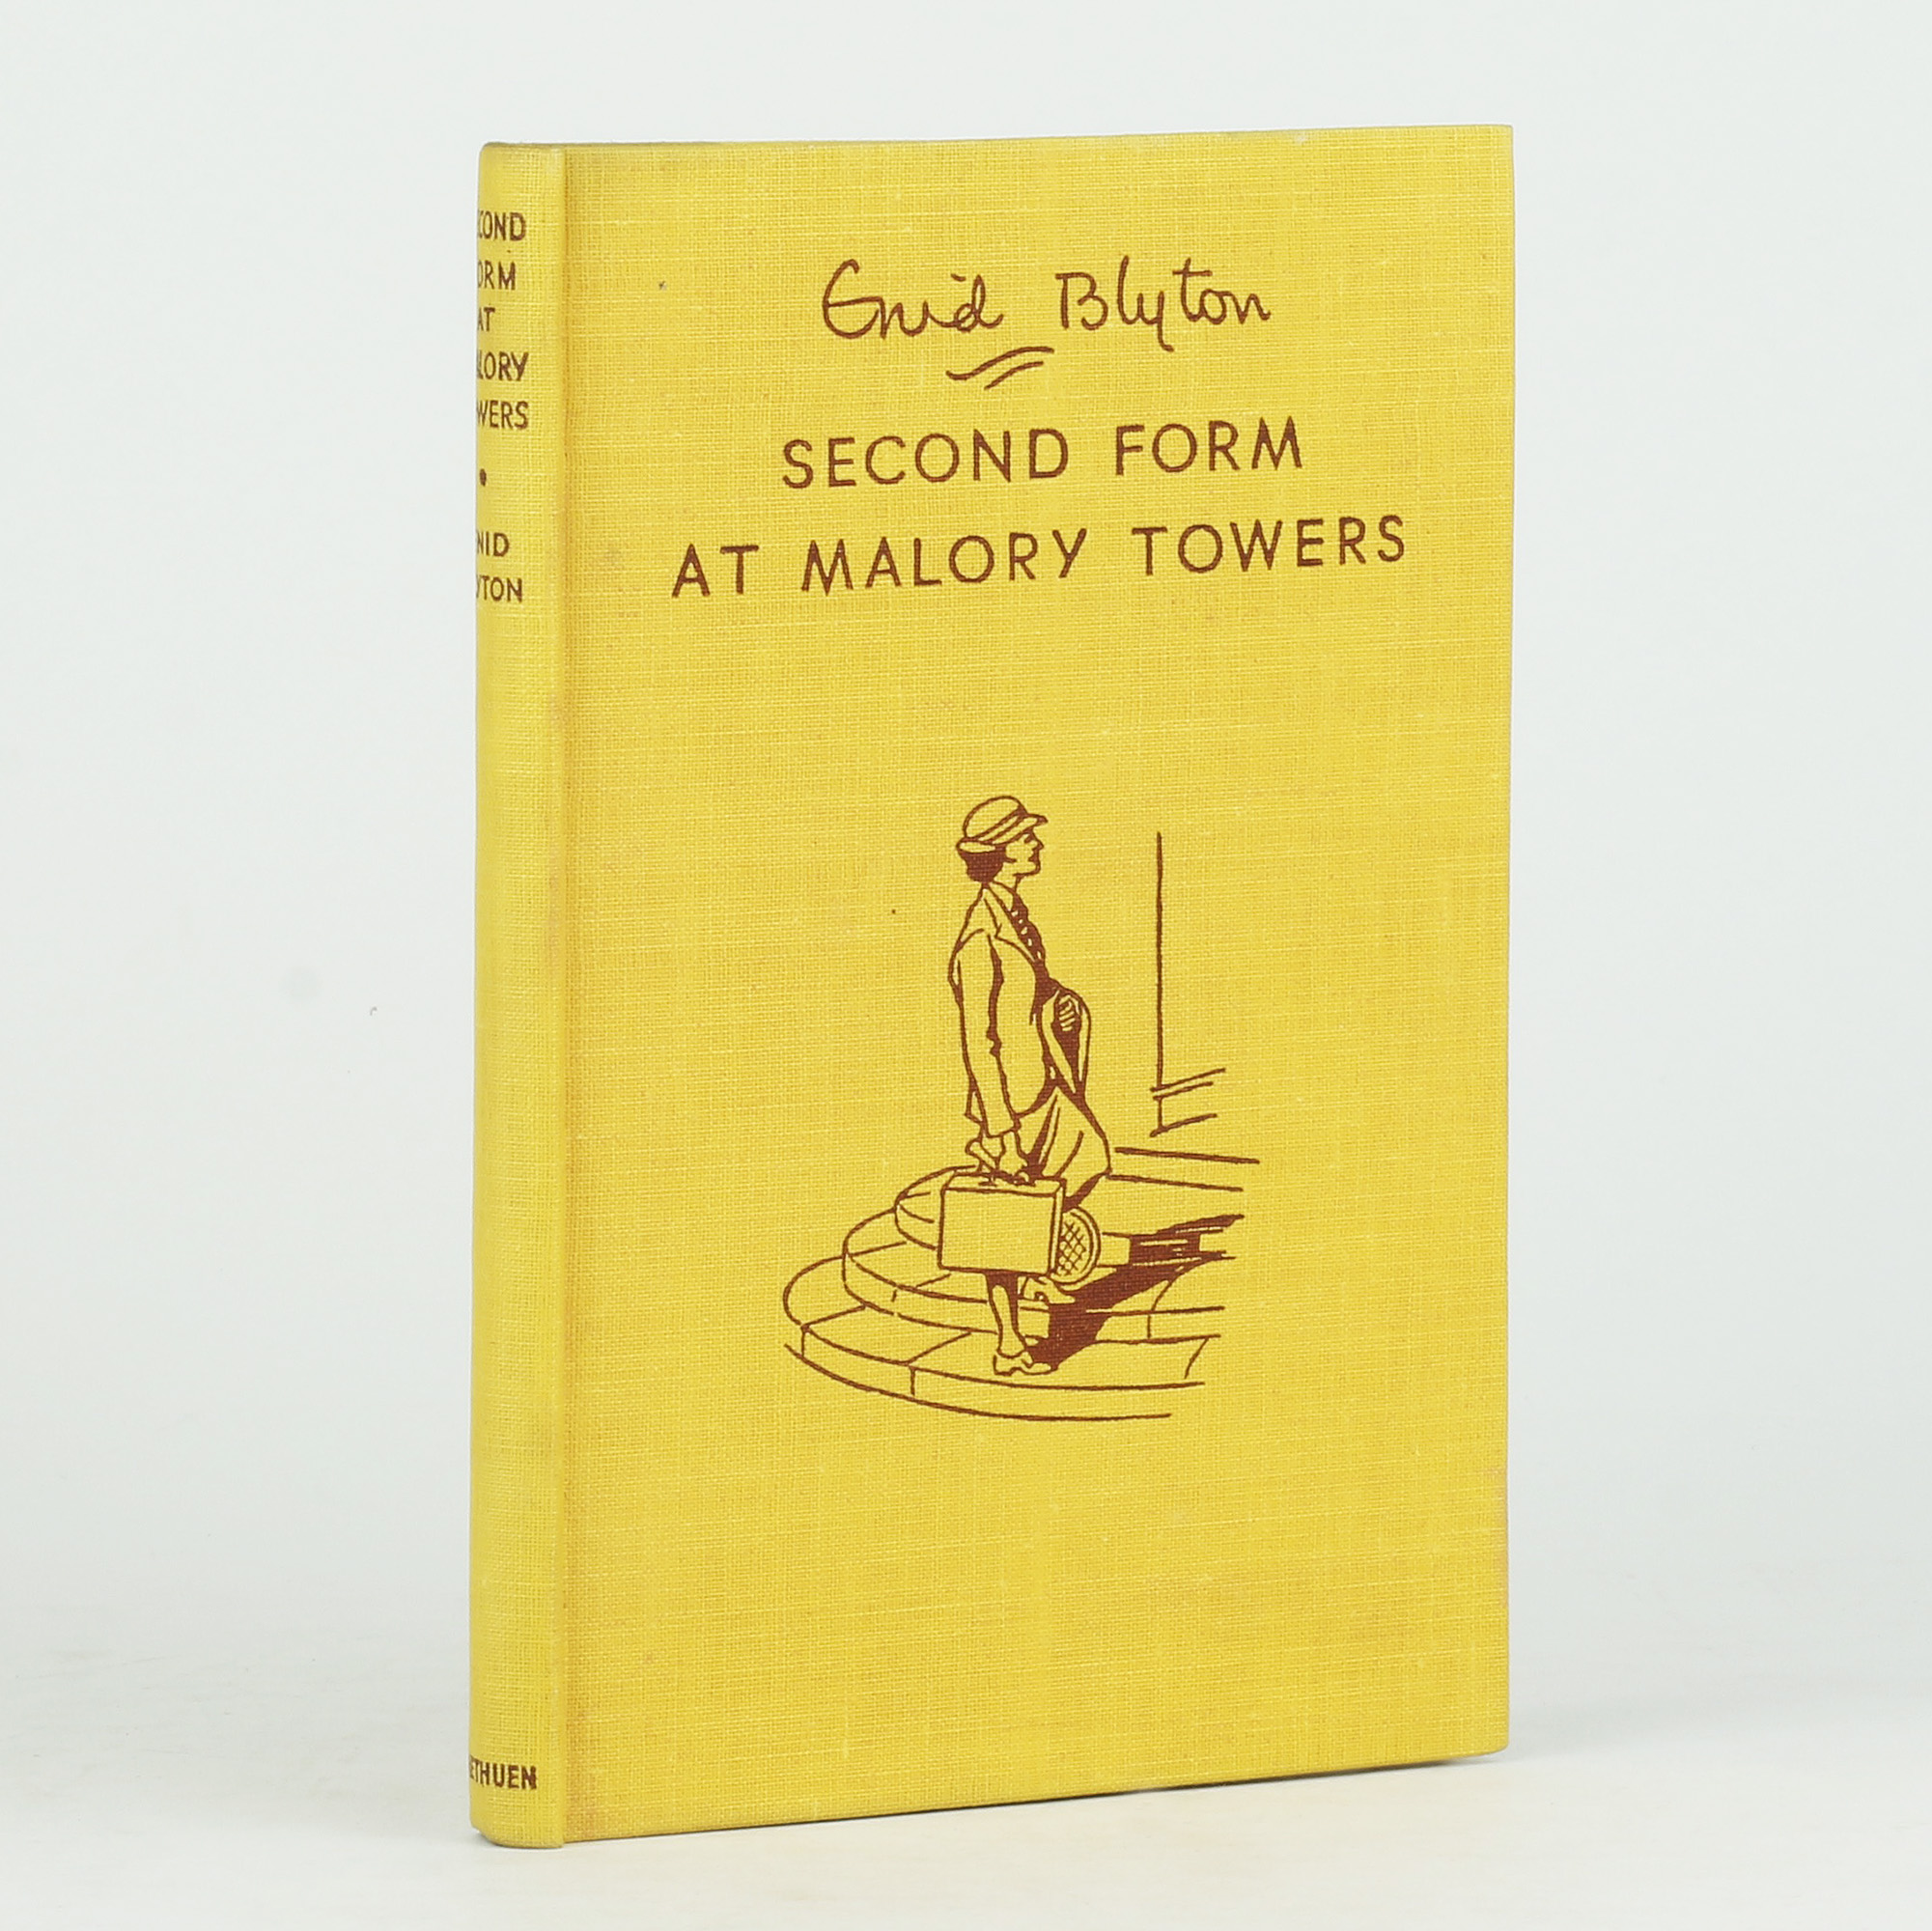 the second form at malory towers